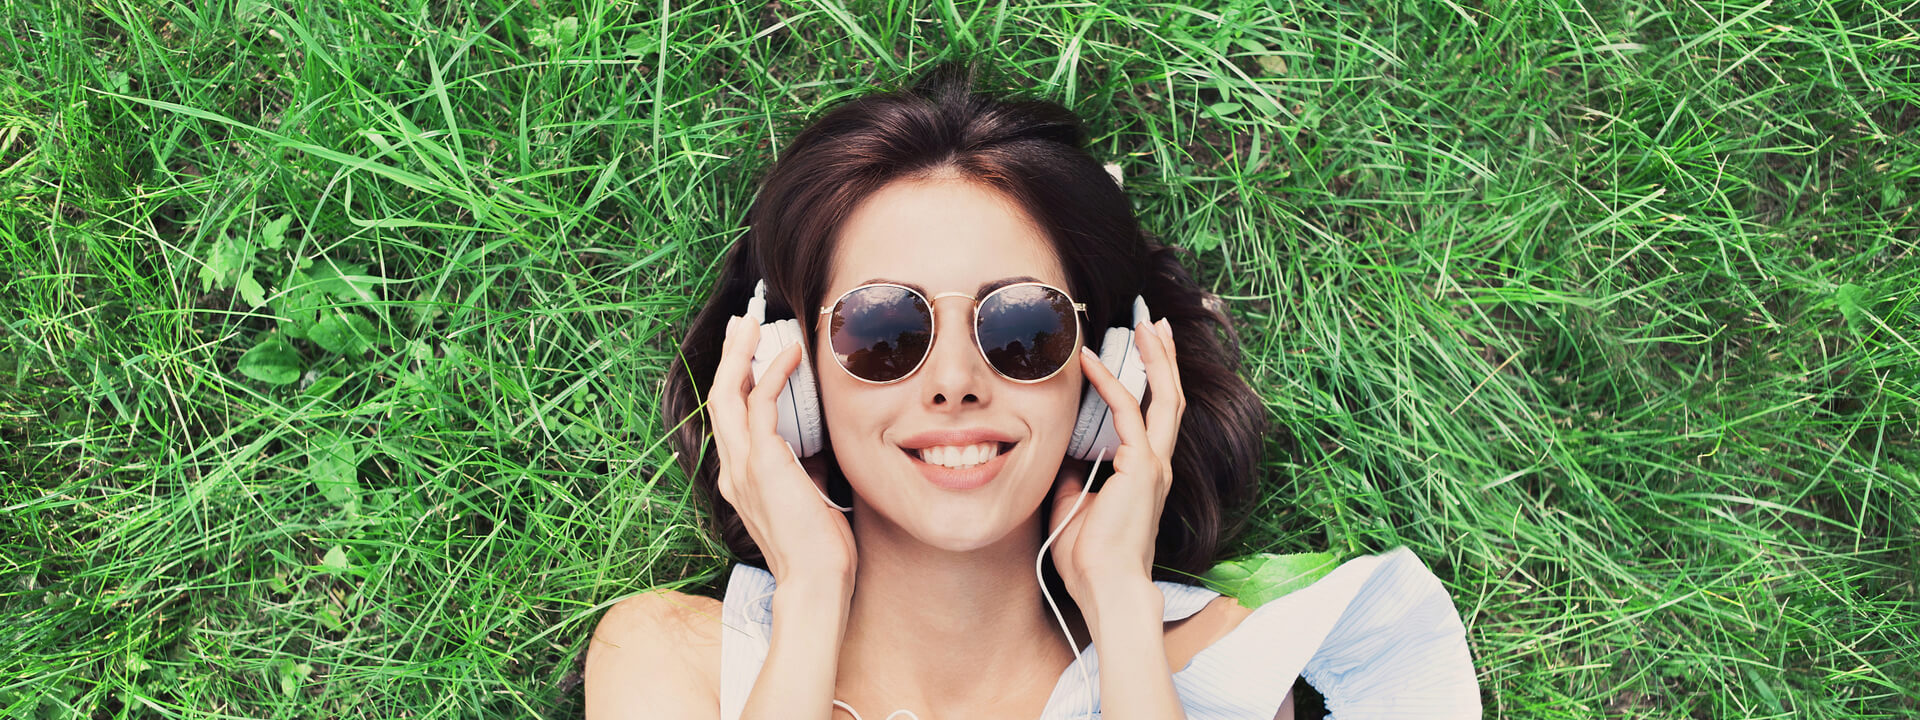 Why listening to music can improve your health